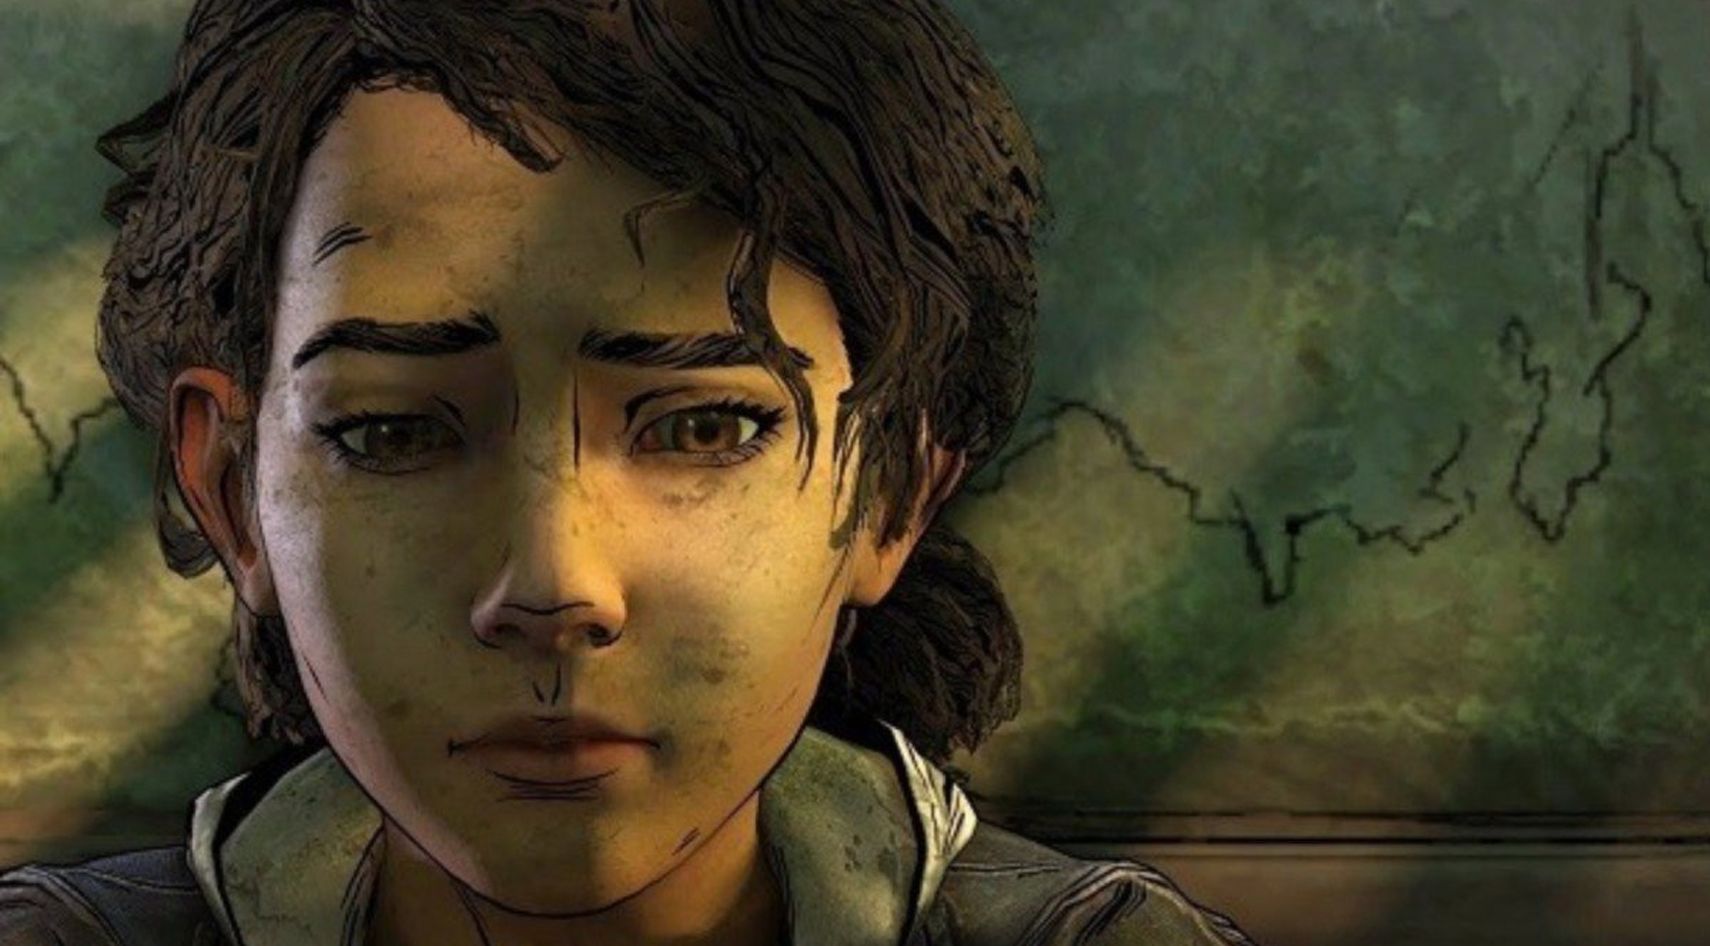 Telltale S The Walking Dead Protagonist Clementine Finally Gets Her Comic Book Debut